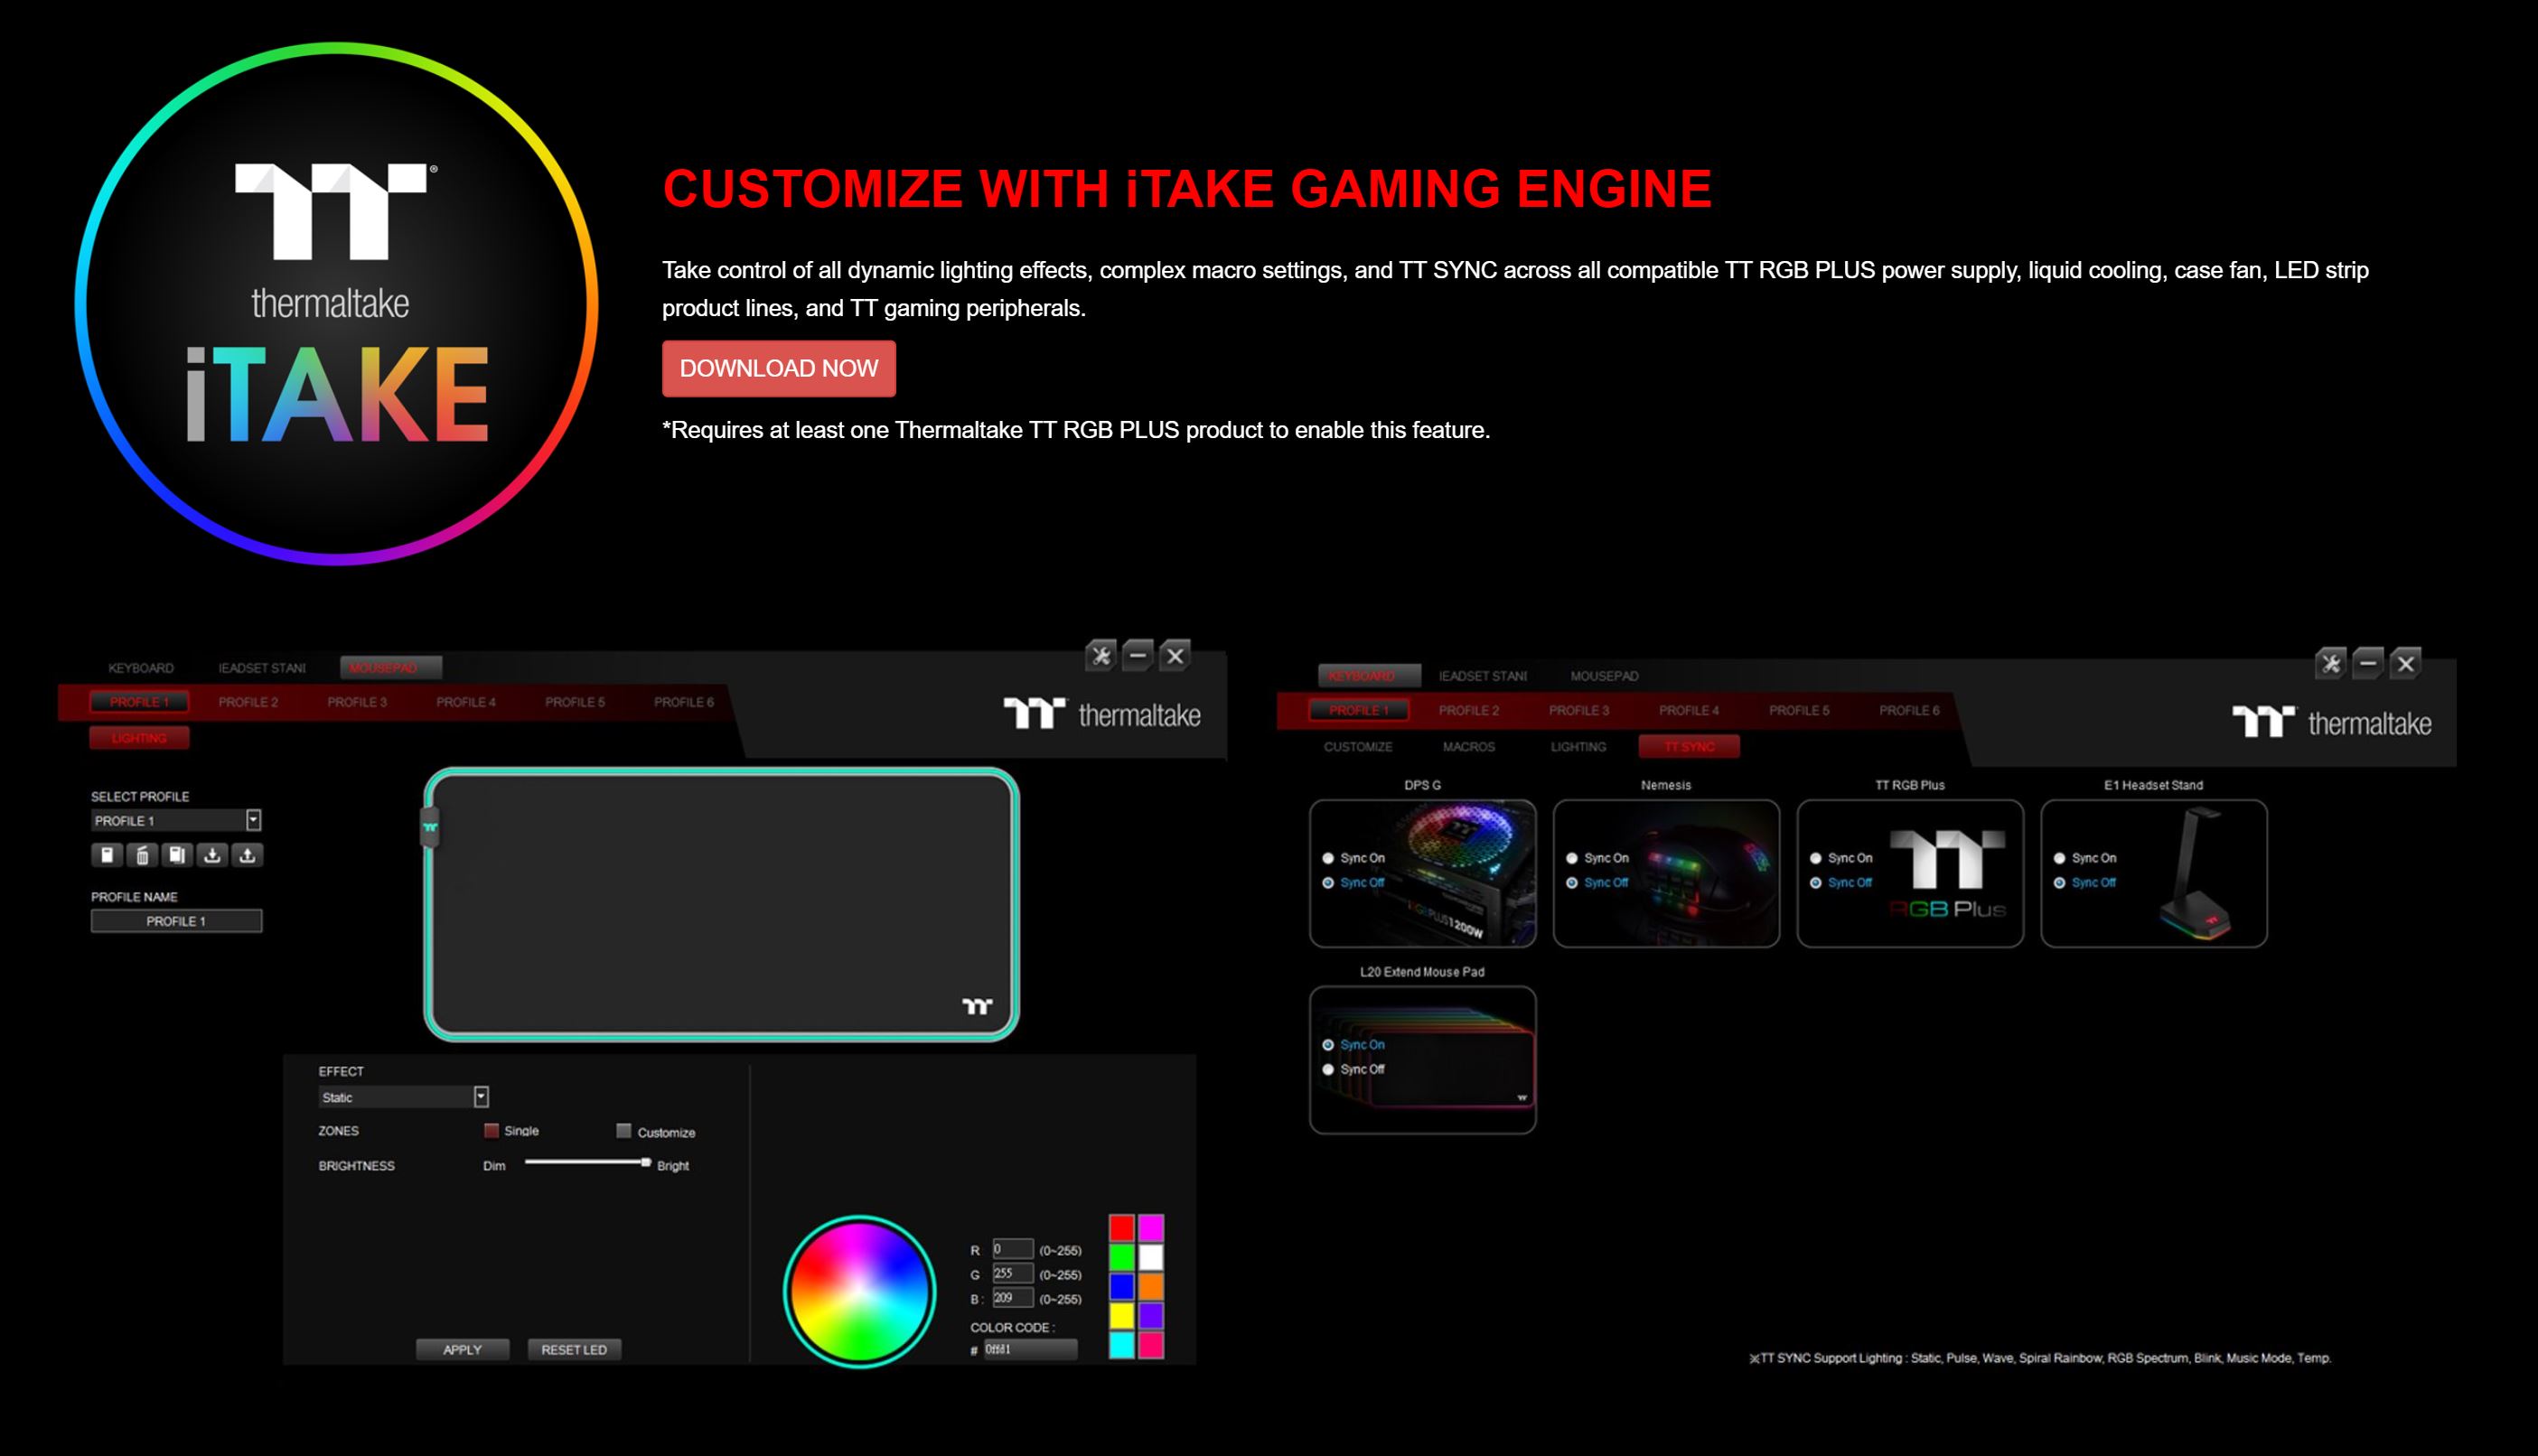 Thermaltake Level 20 RGB Extended Gaming Mouse Pad (GMP-LVT-RGBSXS-01)